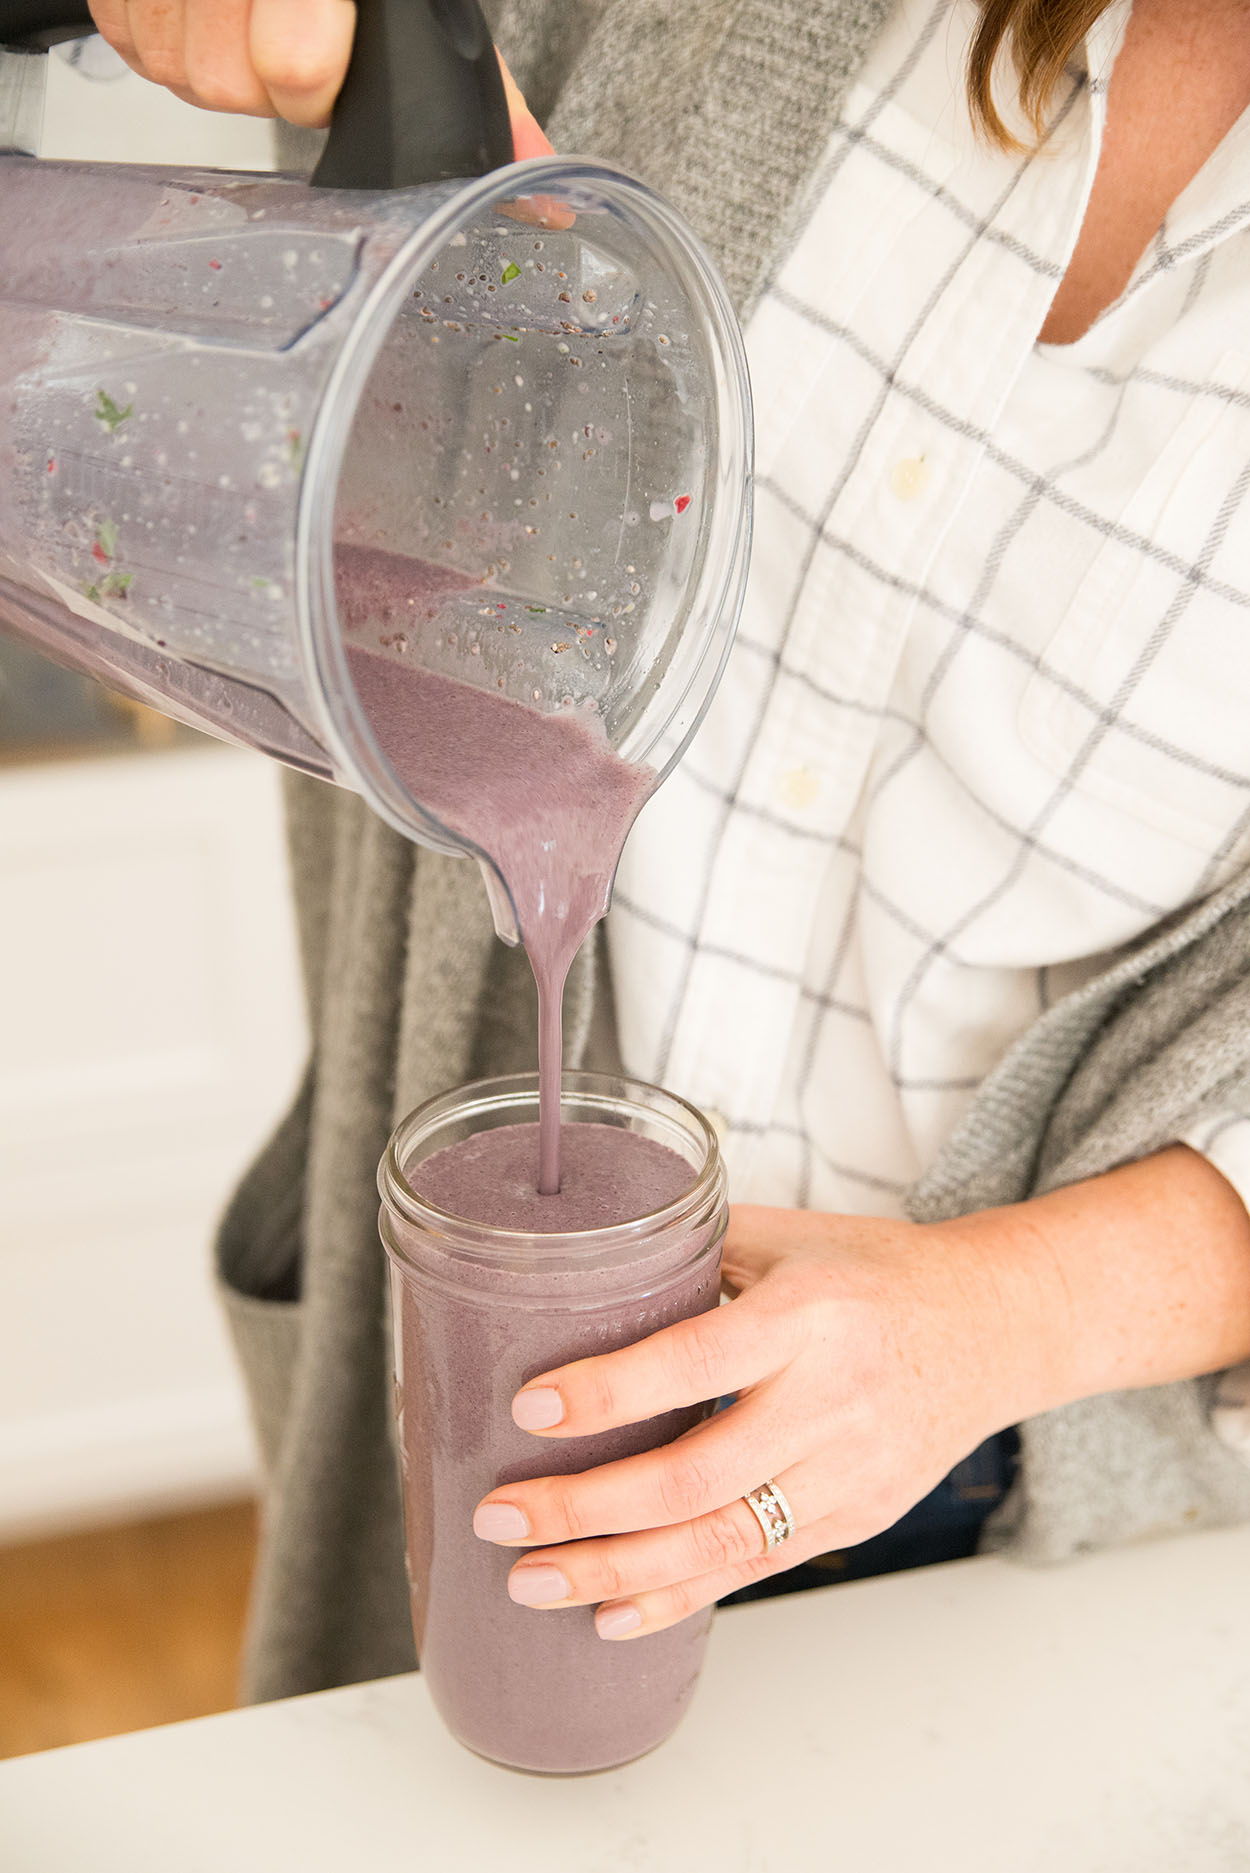 Vitamix blender with smoothie being poured into a glass